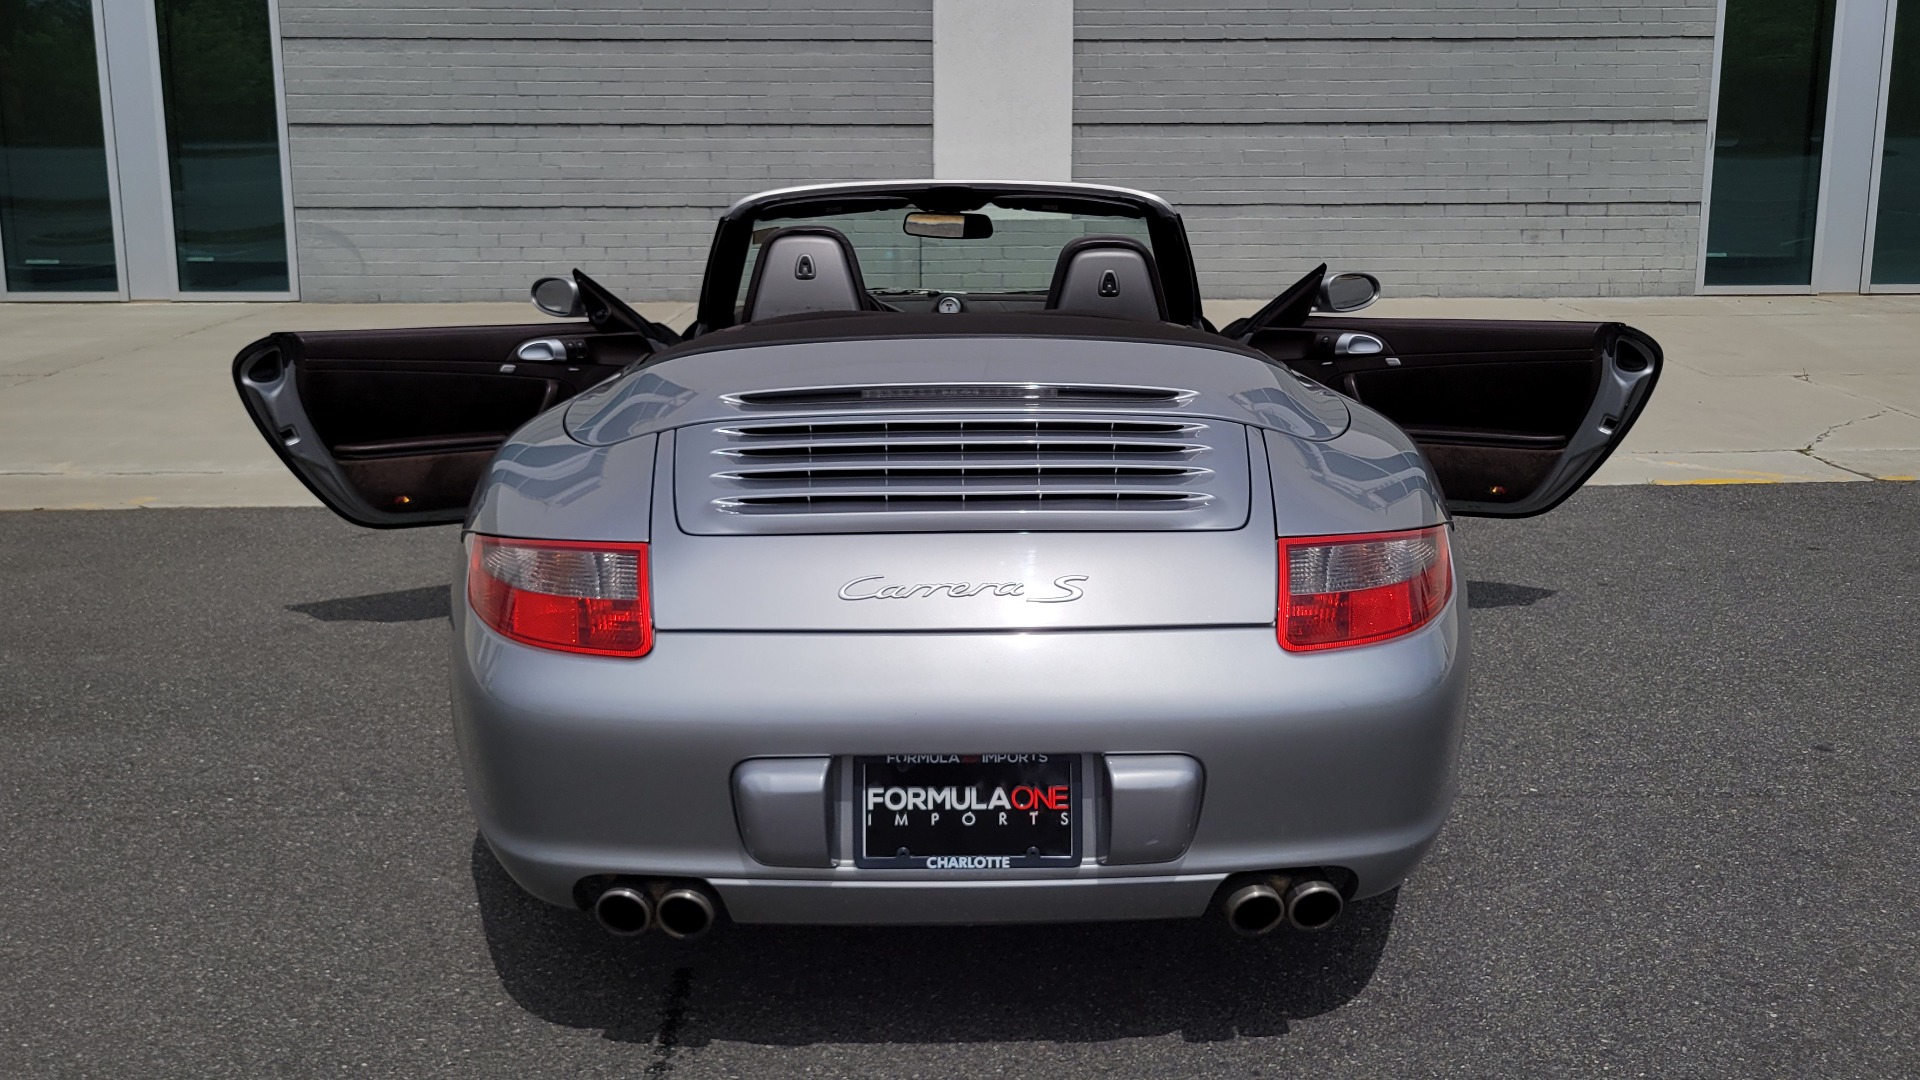 Used 2006 Porsche 911 CARRERA S CABRIOLET / SPORT CHRONO / BOSE / SPORT SEATS / SPORT SHIFTER for sale $62,999 at Formula Imports in Charlotte NC 28227 74